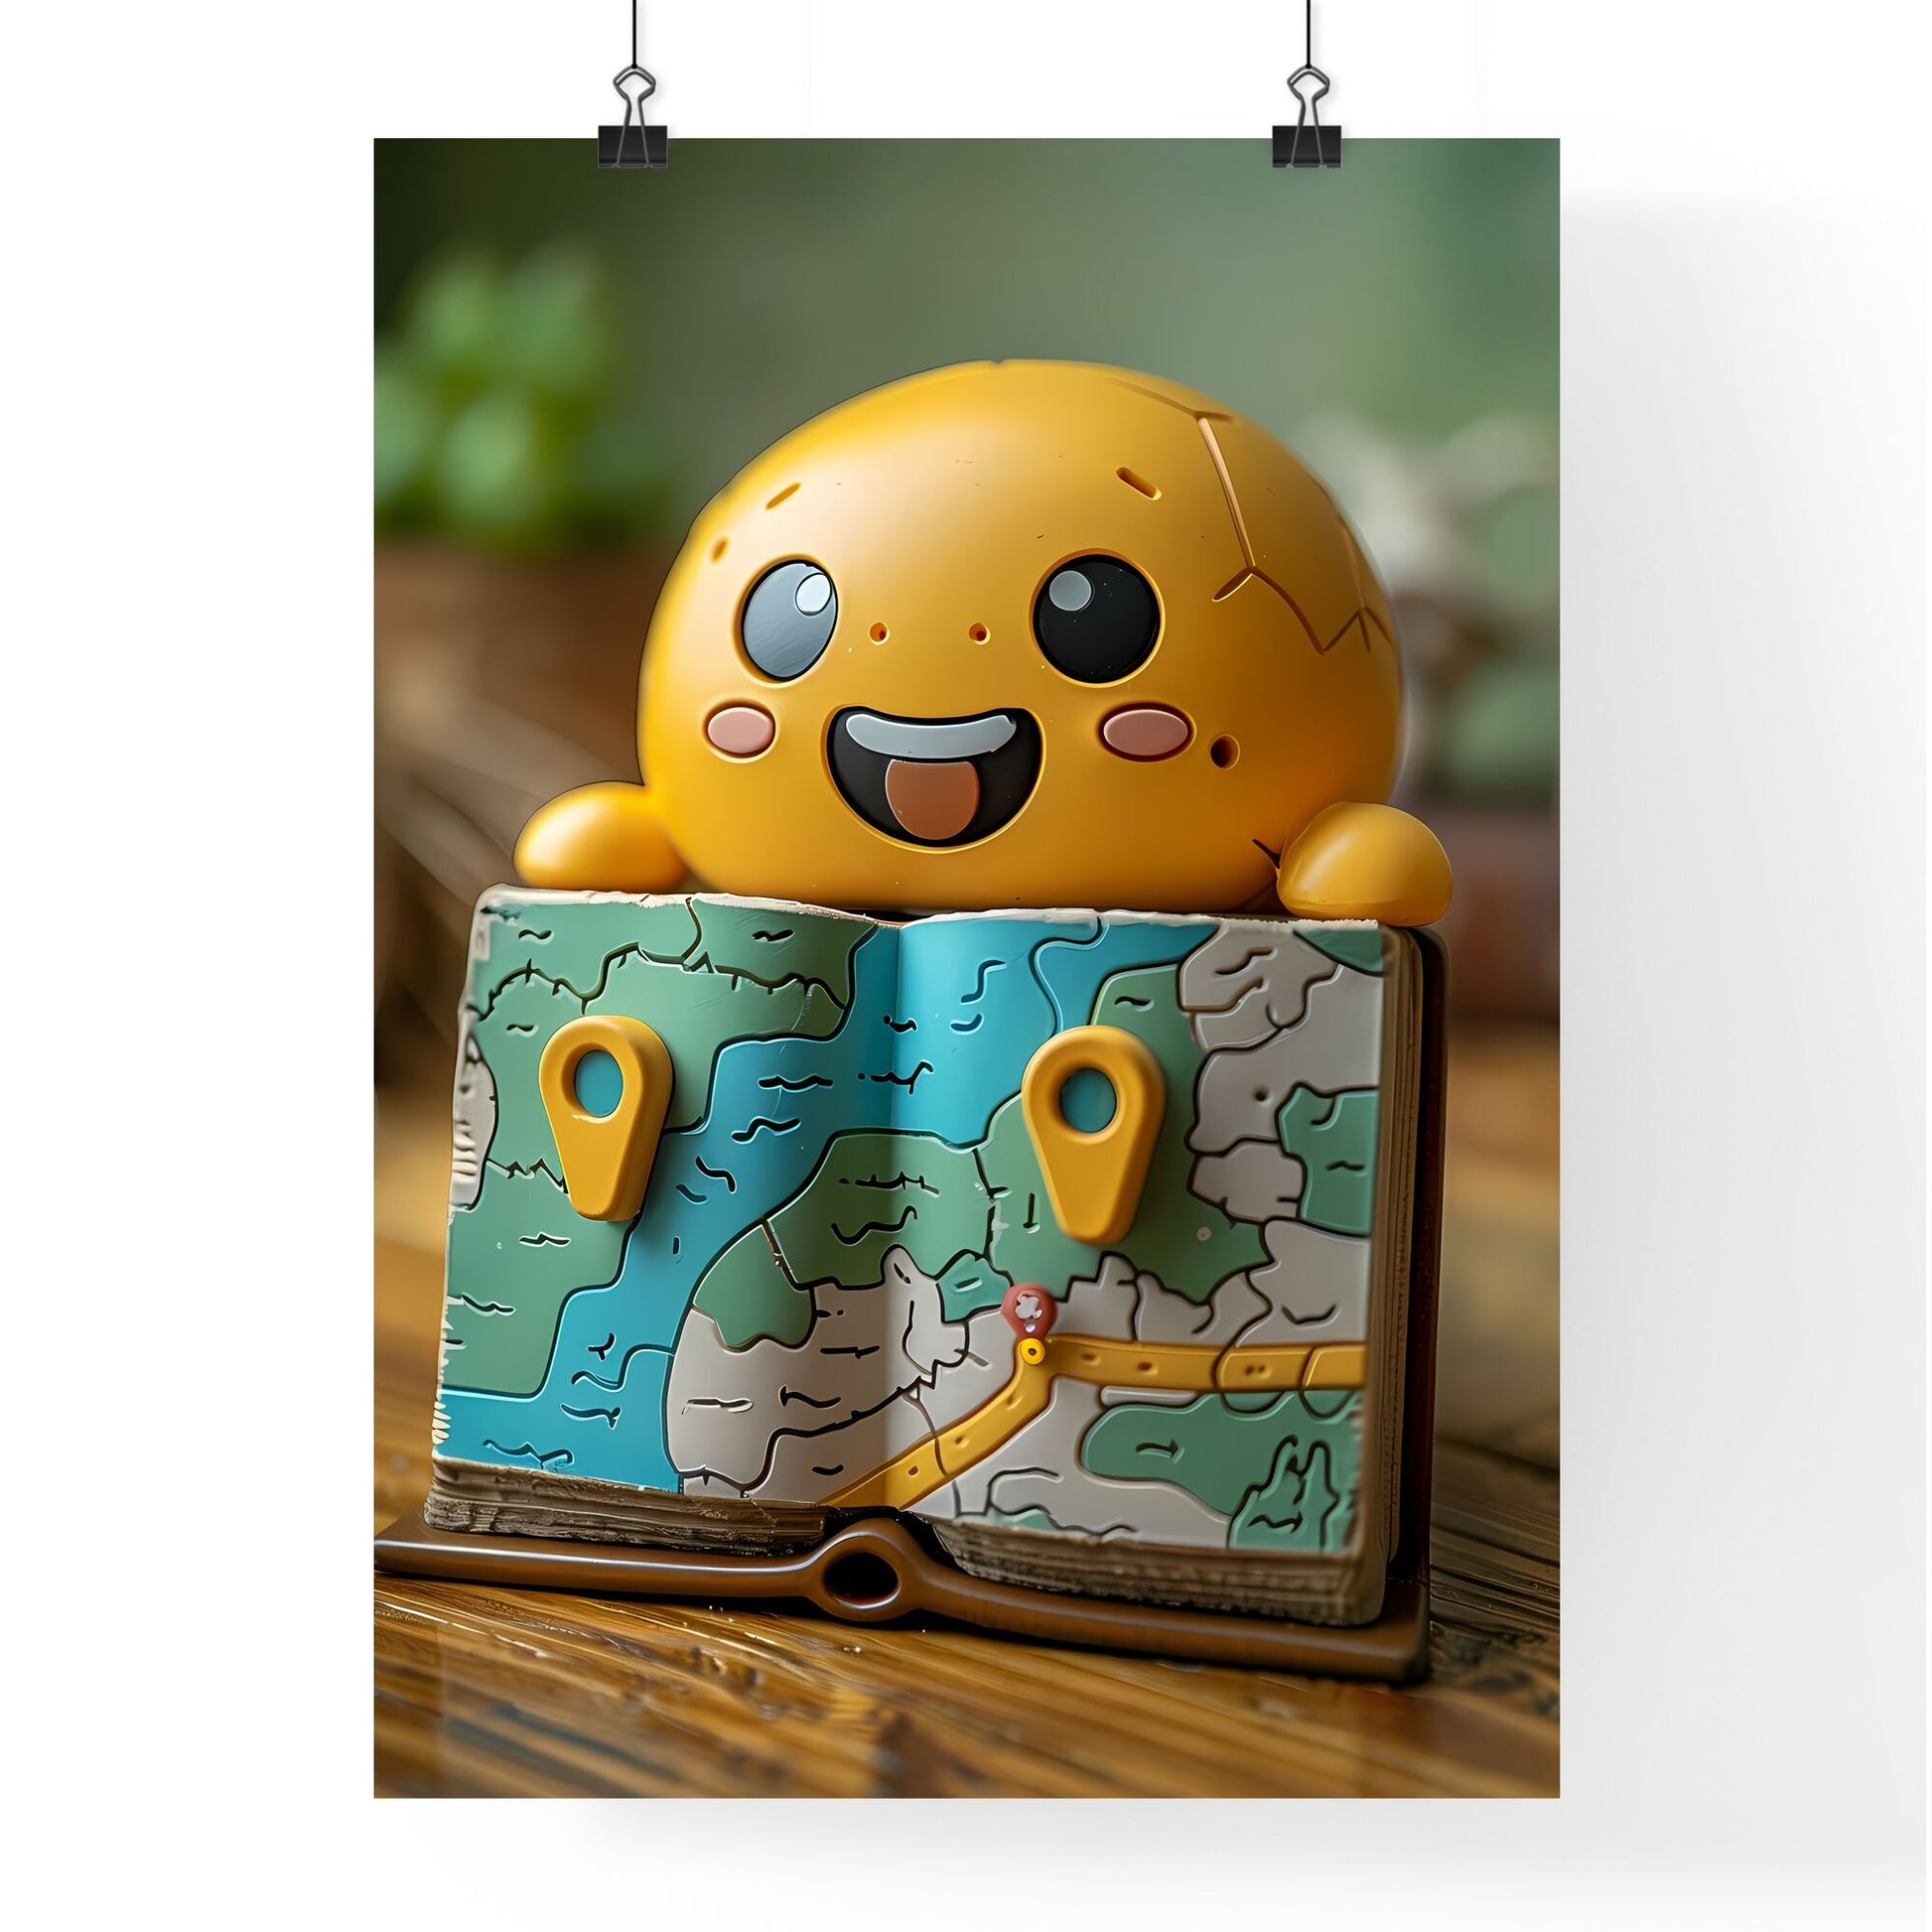 3D Map Emoji-Like Road Map With Markers, High-Quality Toy Figurine Book Painting Default Title